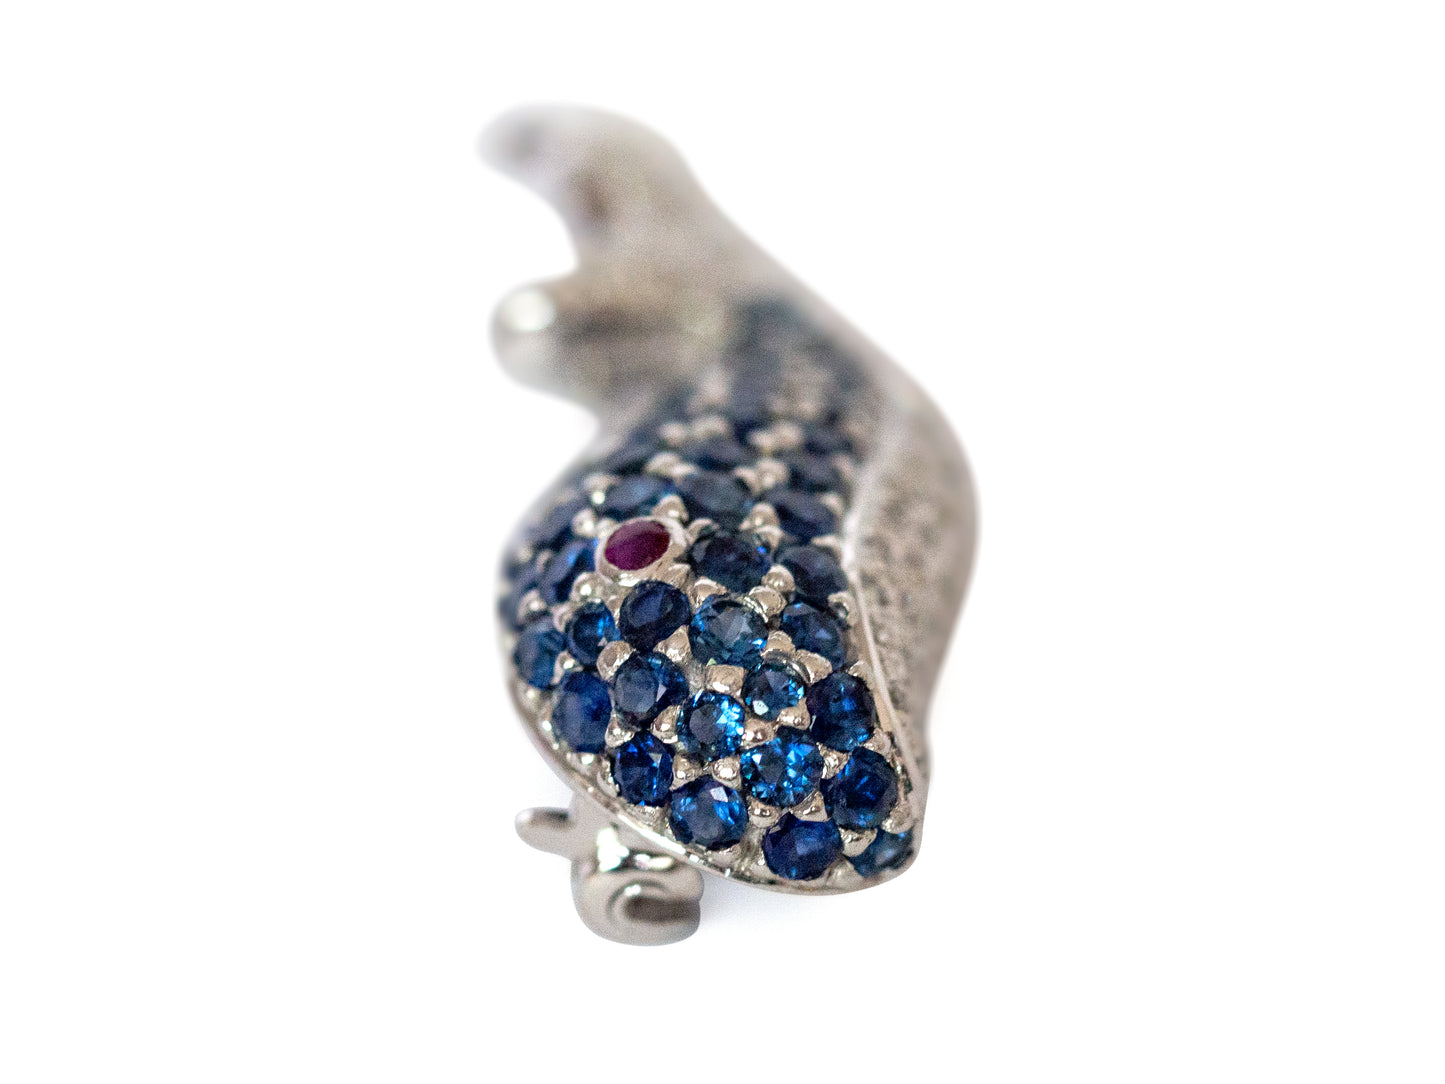 LeVian 18K White Gold Sapphire and Diamond Whale Pin